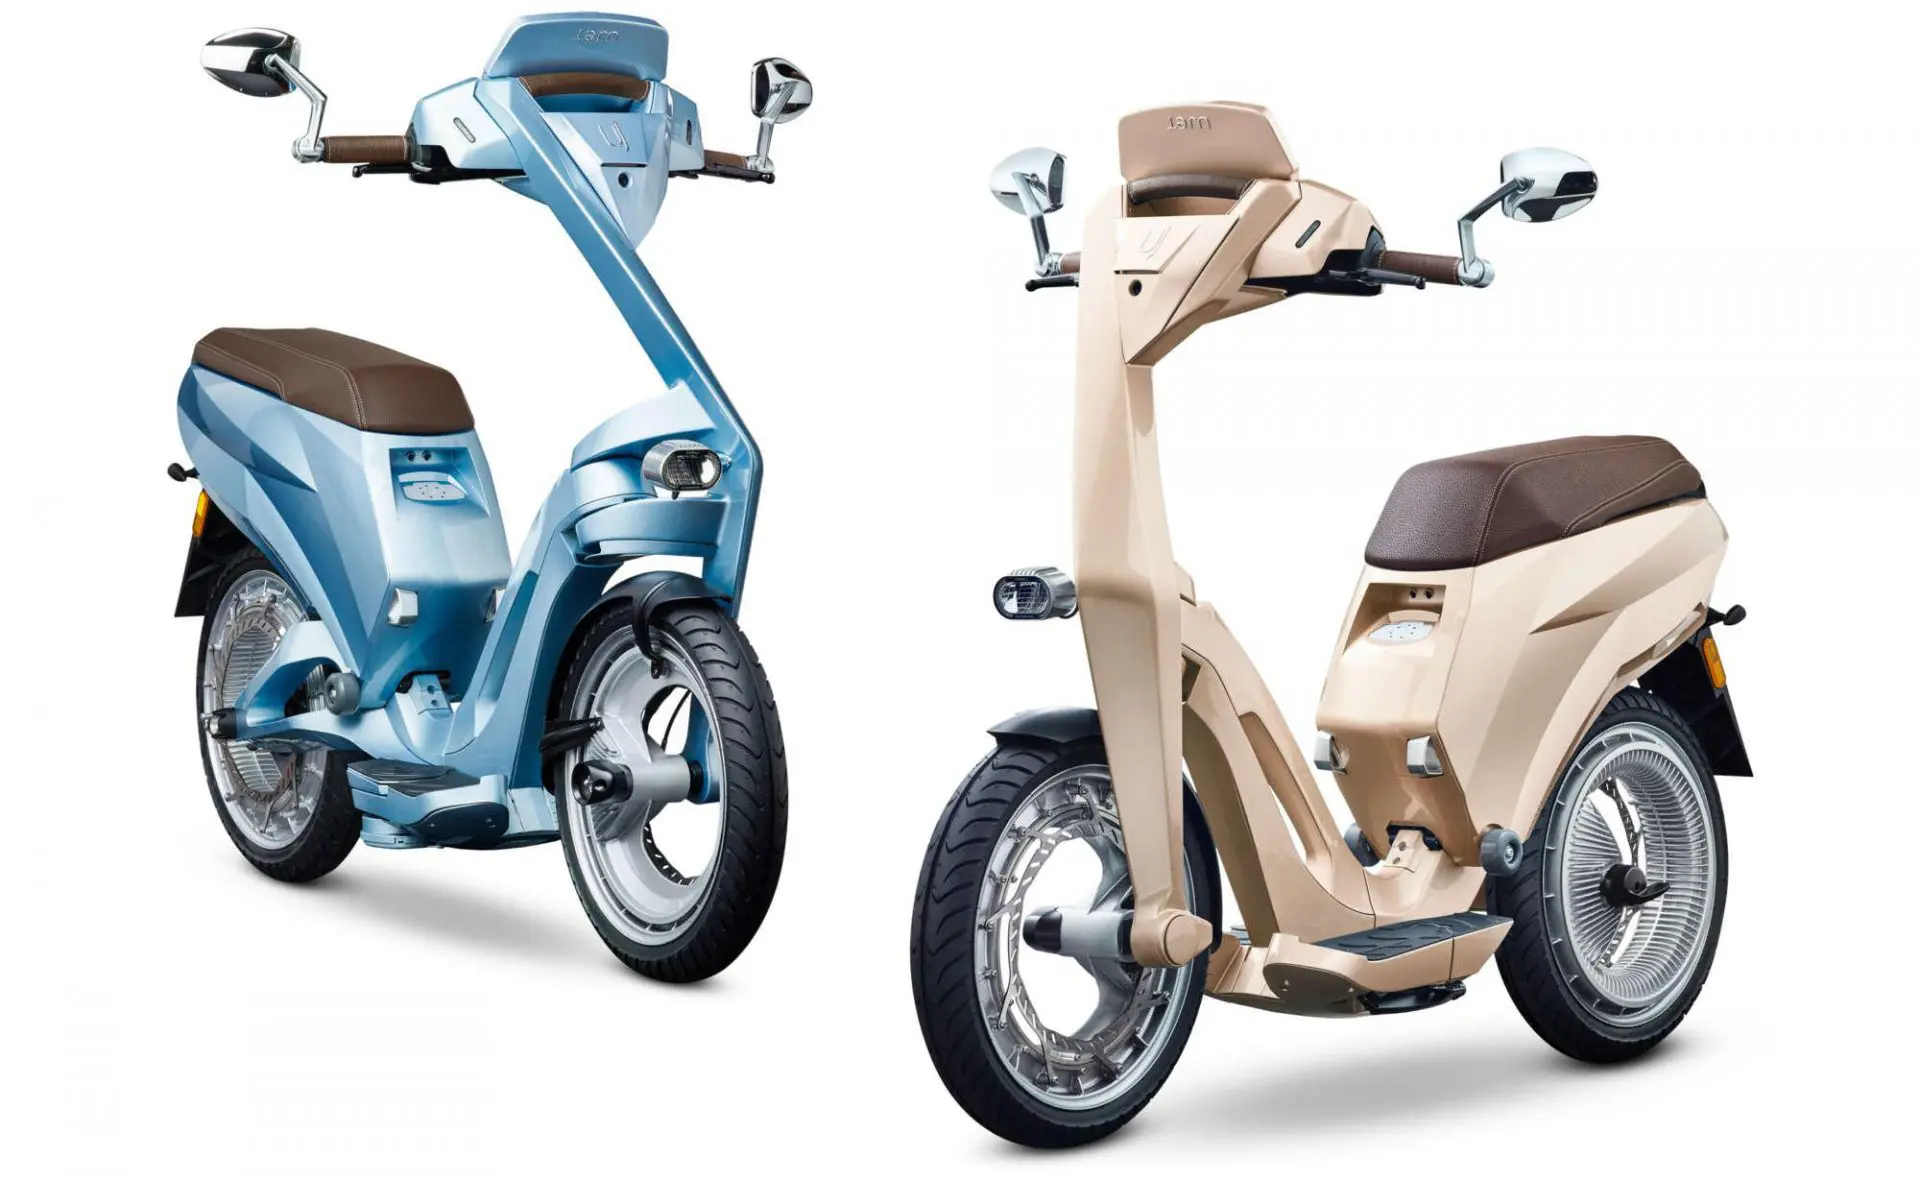 UJET electric scooter